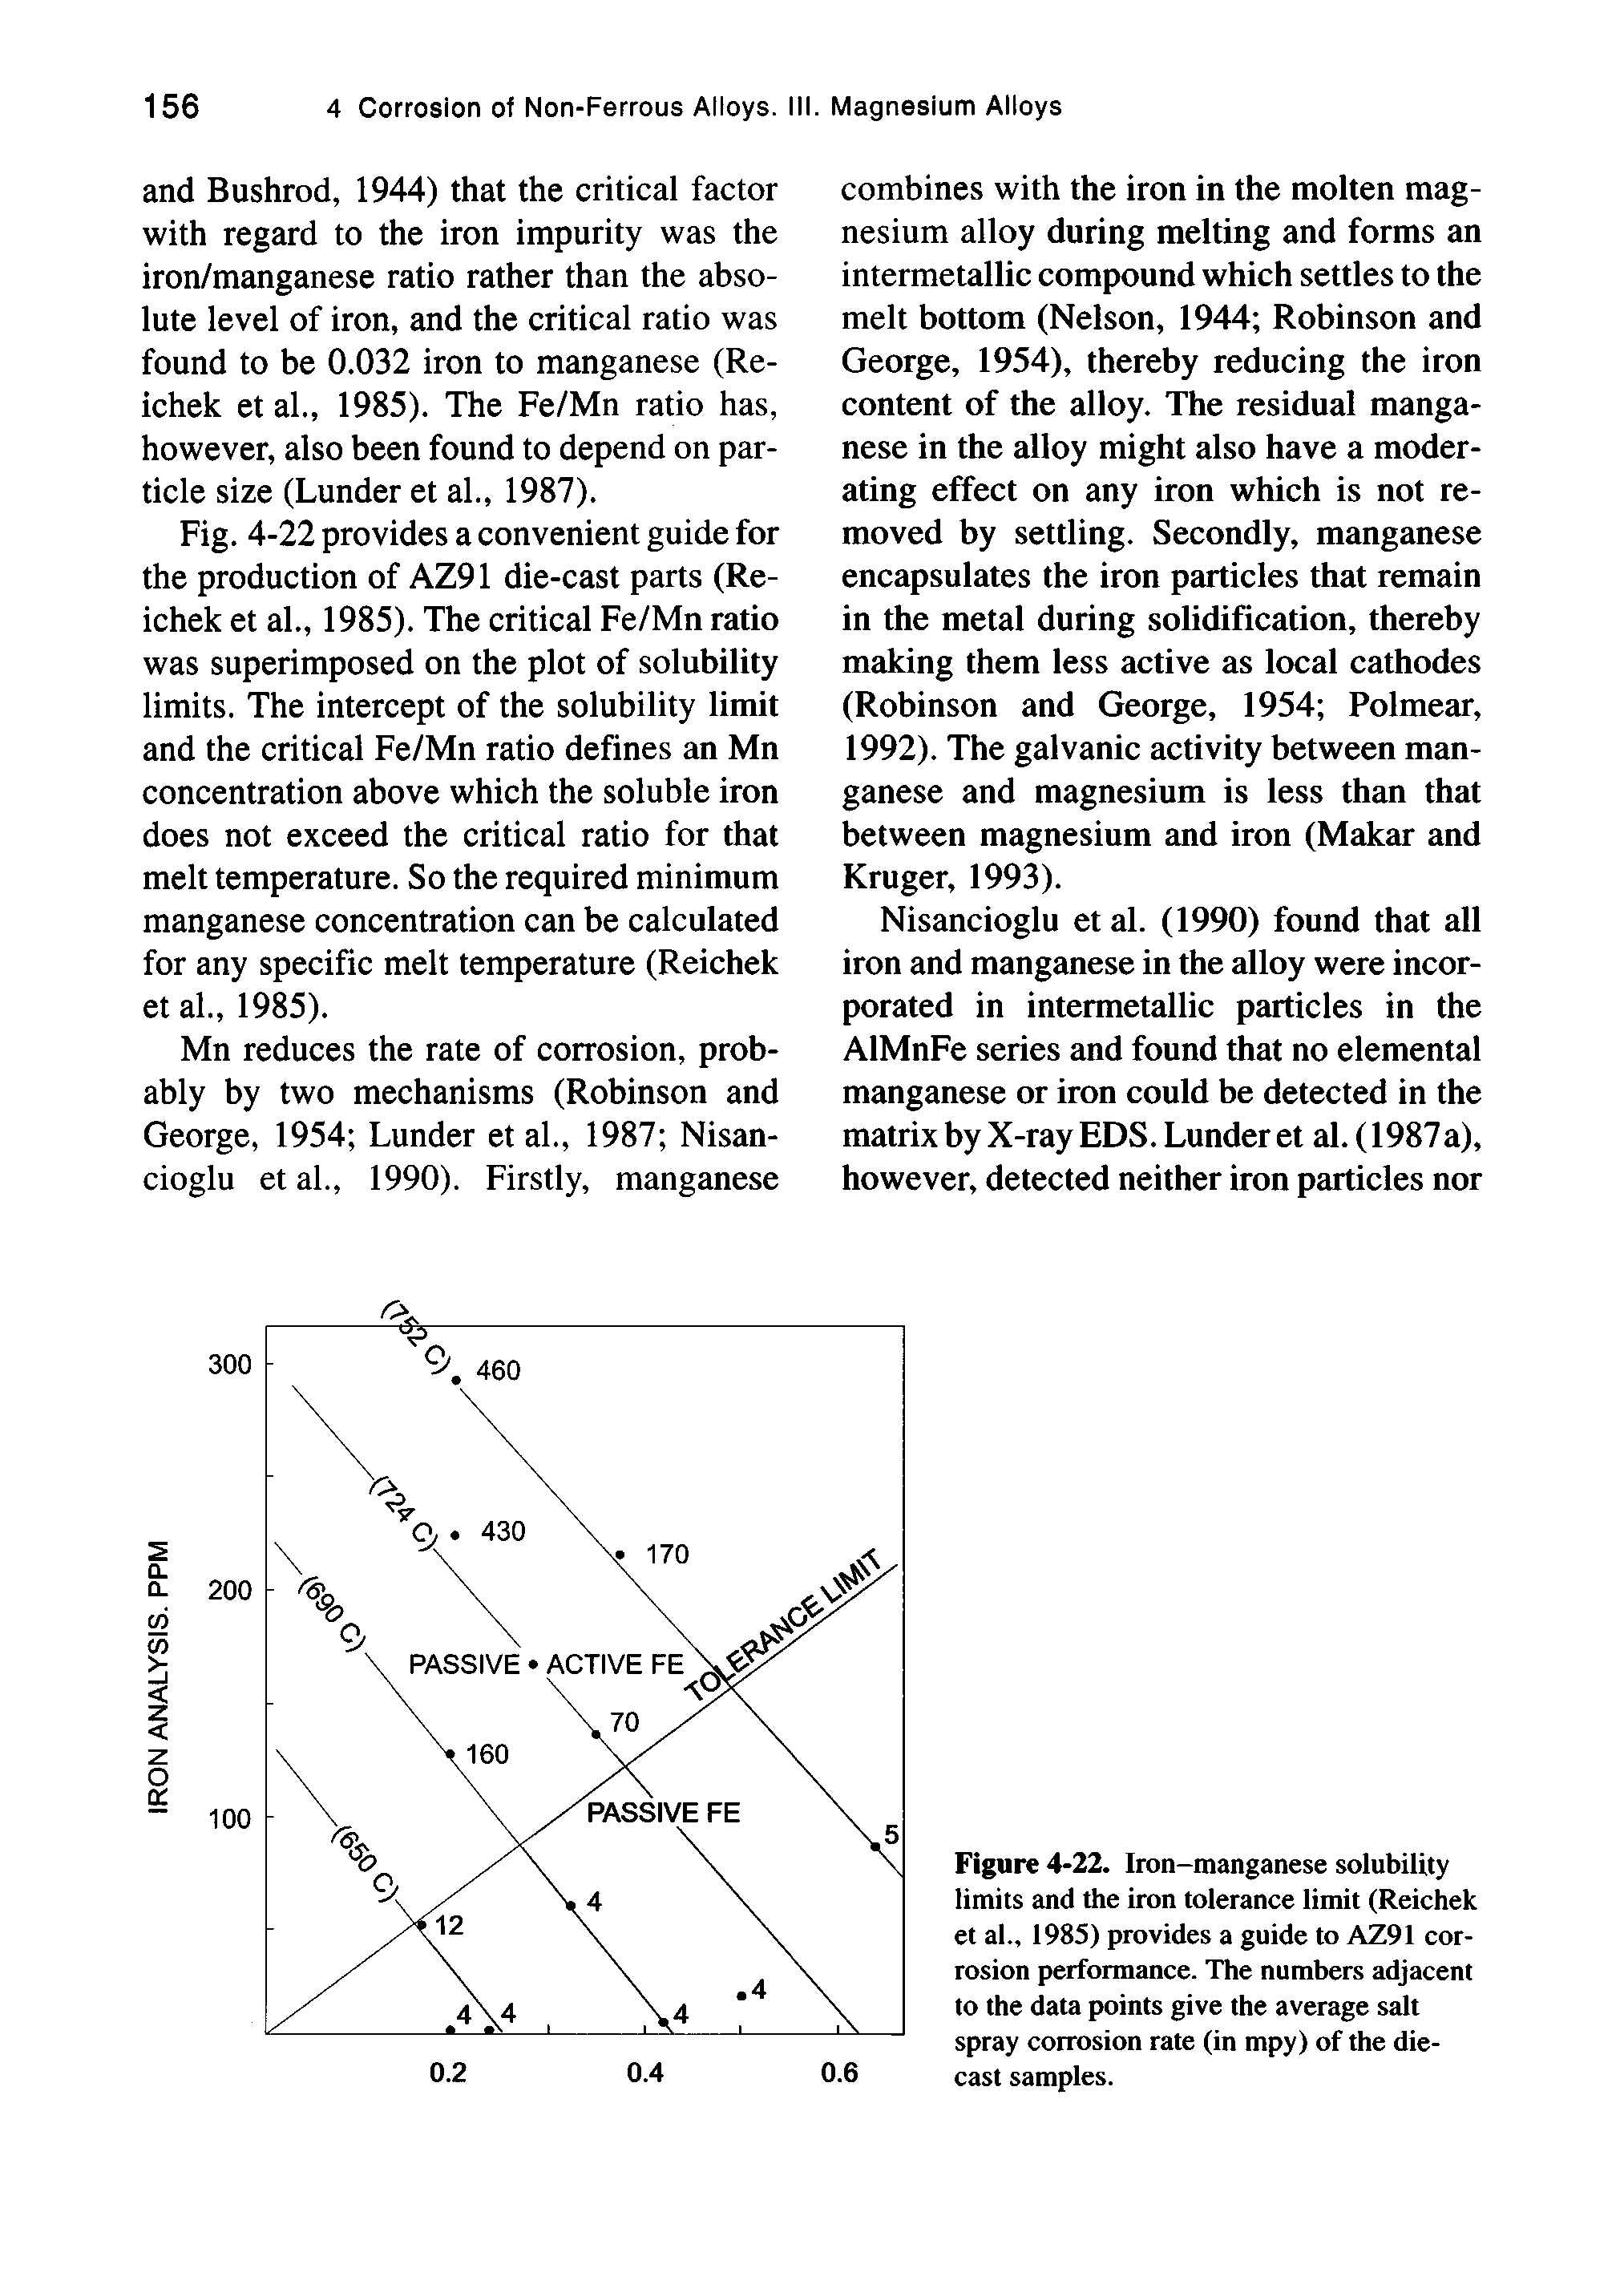 Figure 4-22. Iron-manganese solubility limits and the iron tolerance limit (Reichek et al., 1985) provides a guide to AZ91 corrosion performance. The numbers adjacent to the data points give the average salt spray corrosion rate (in mpy) of the die-cast samples.